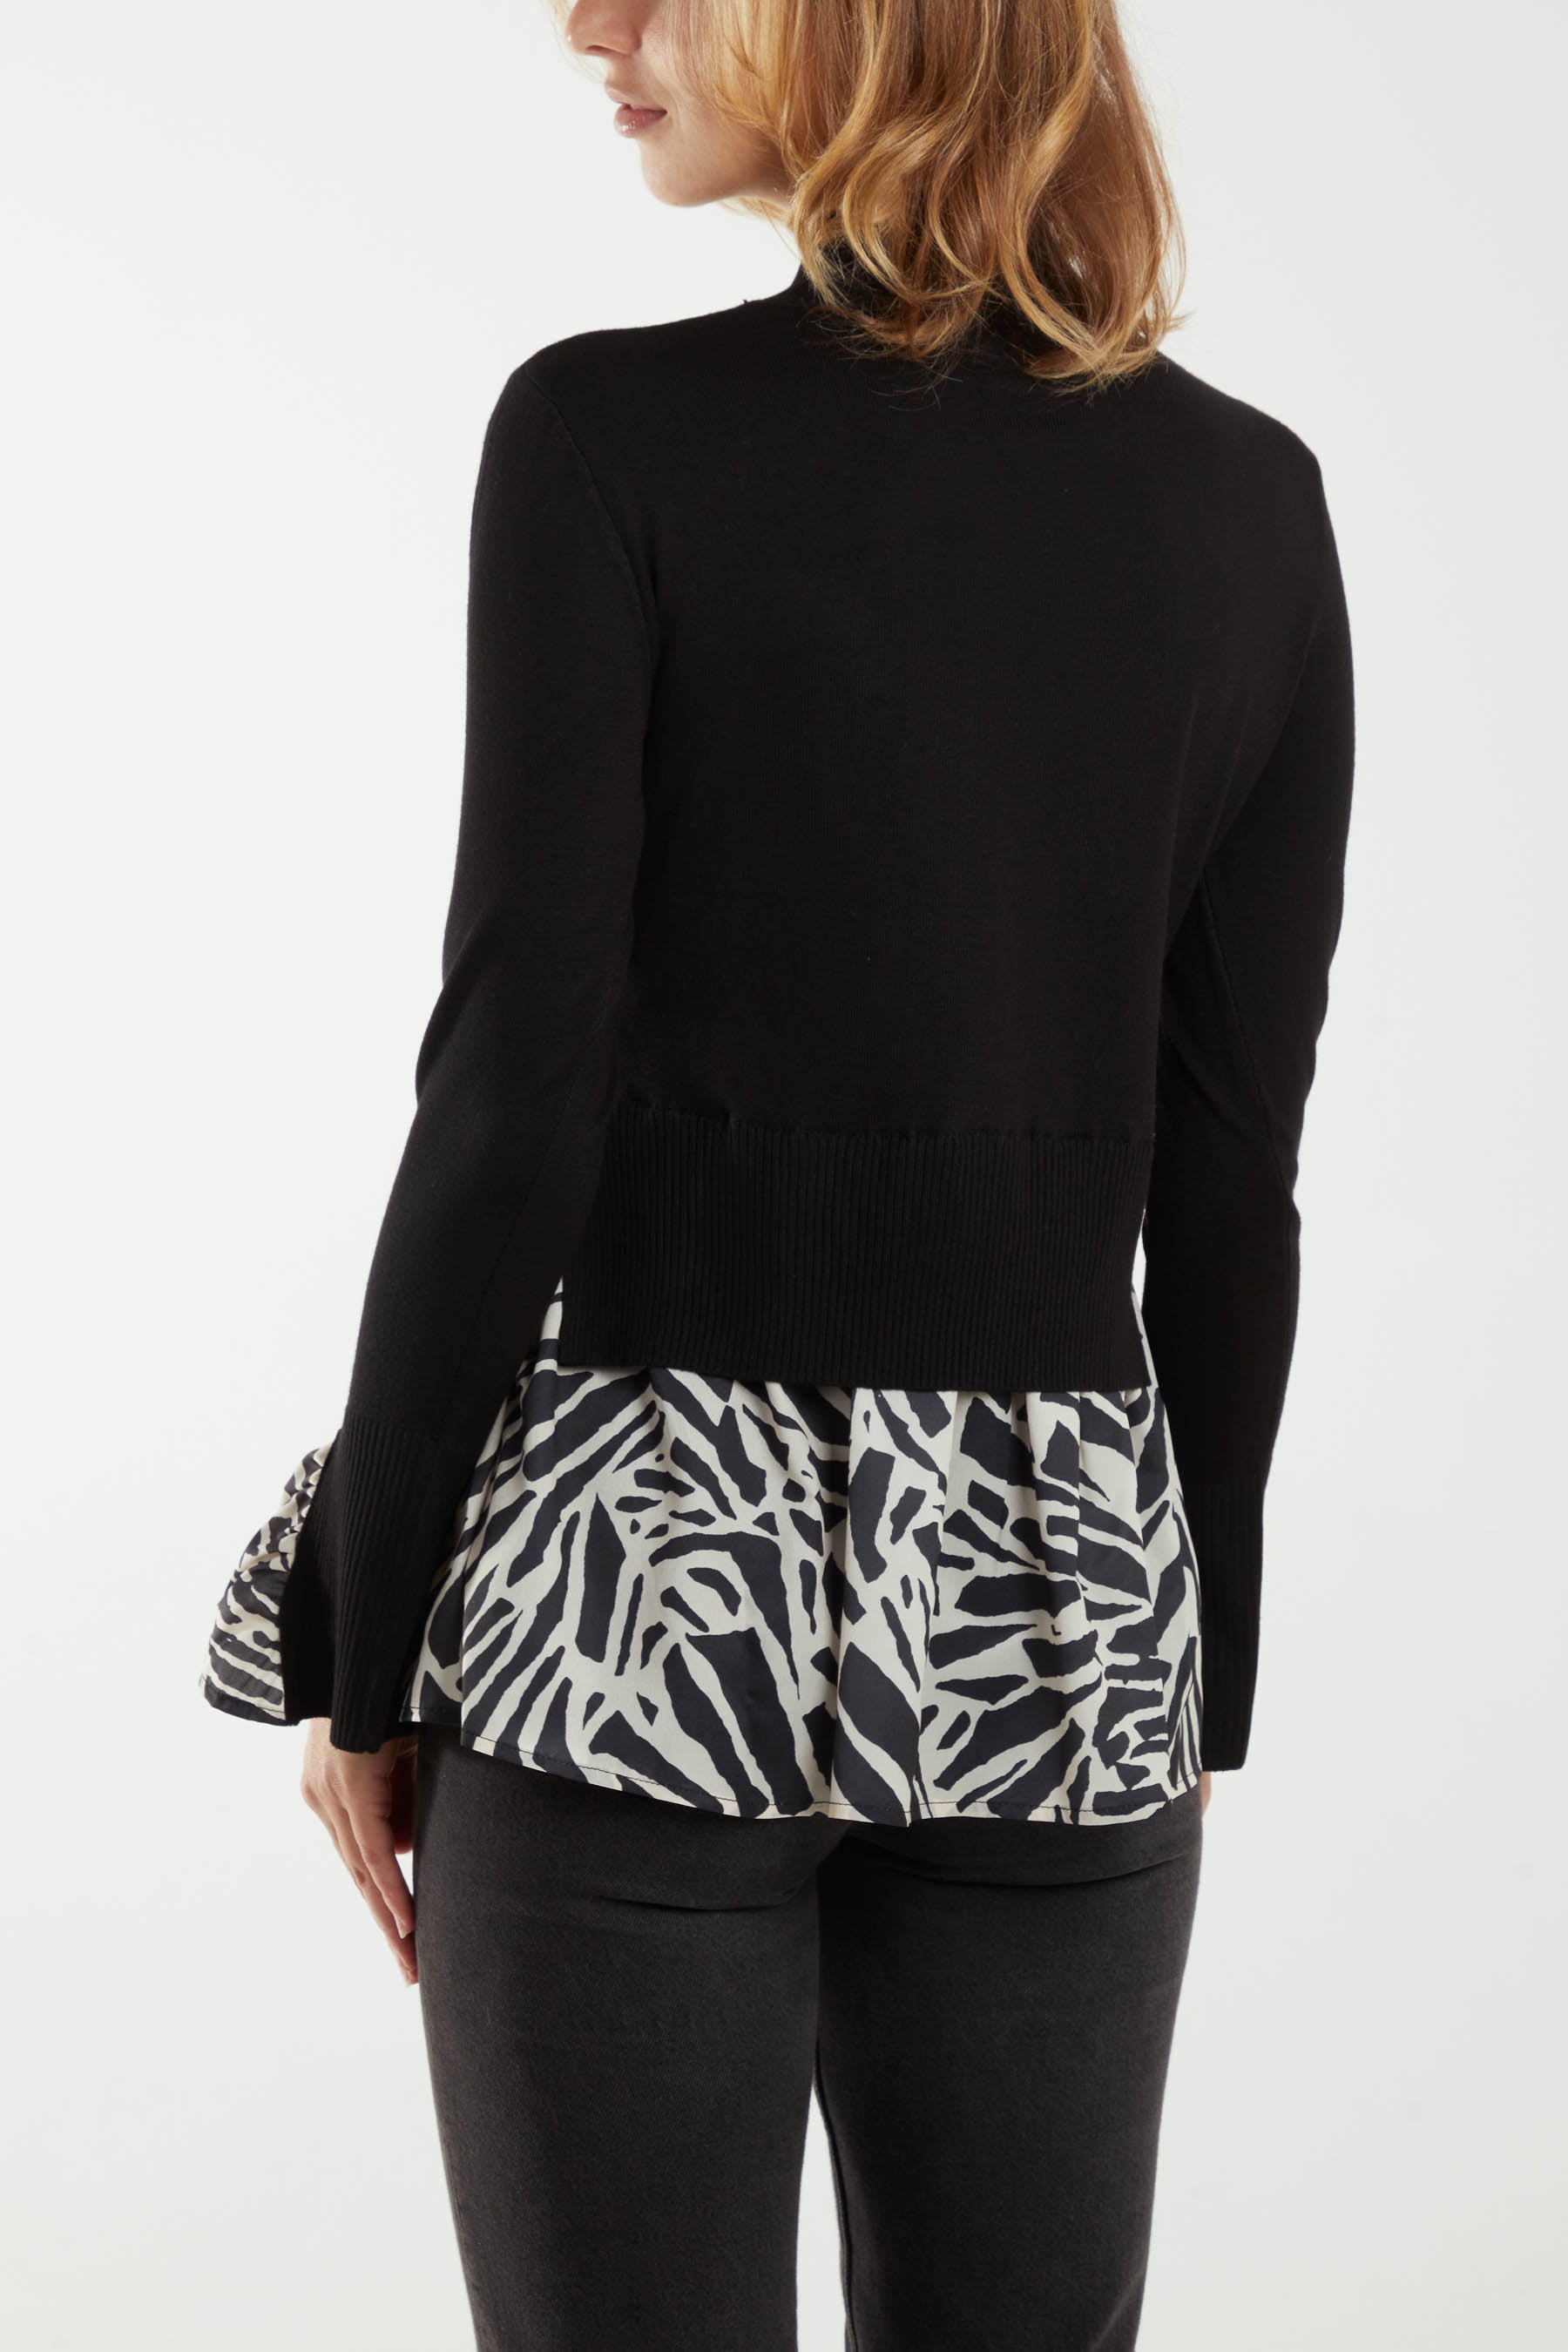 High Neck 2 In 1 Printed Jumper